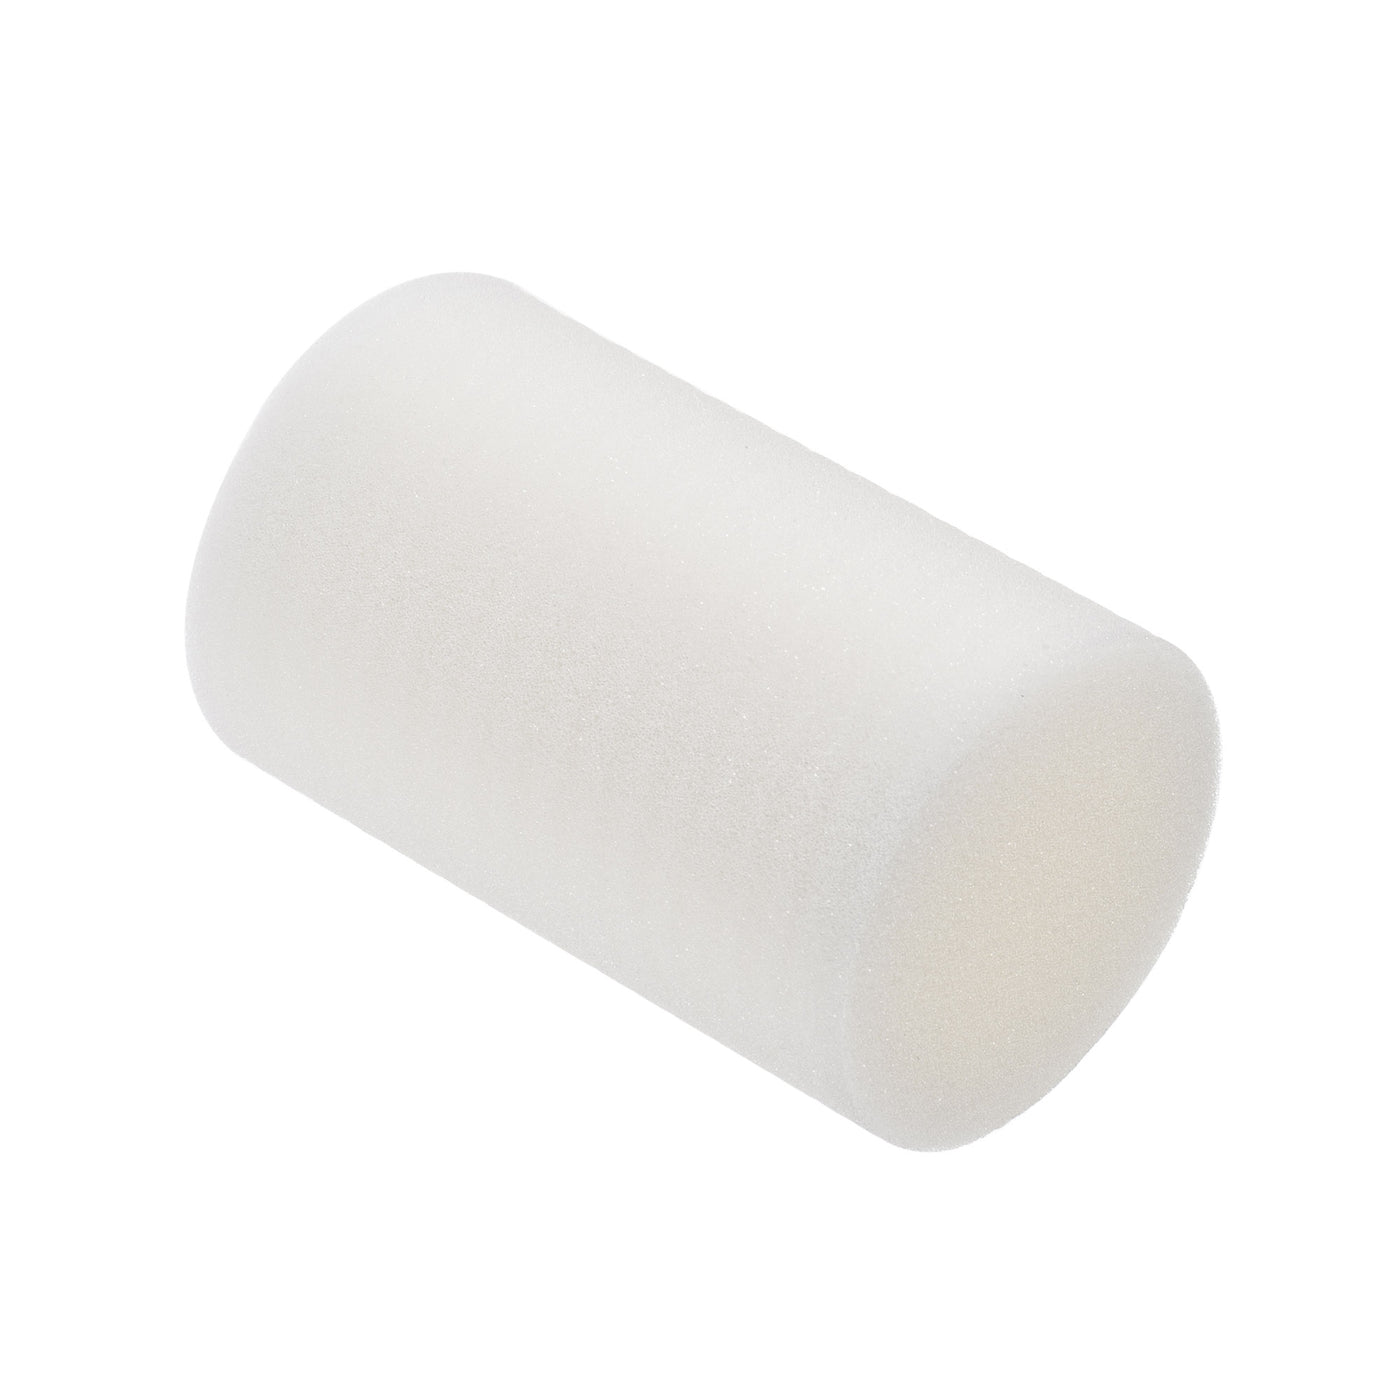 uxcell Uxcell Cup Turner Foam, White 75x73x120mm for 1/2 Inch PVC Pipe Tumbler 10oz-40oz 4 Pcs